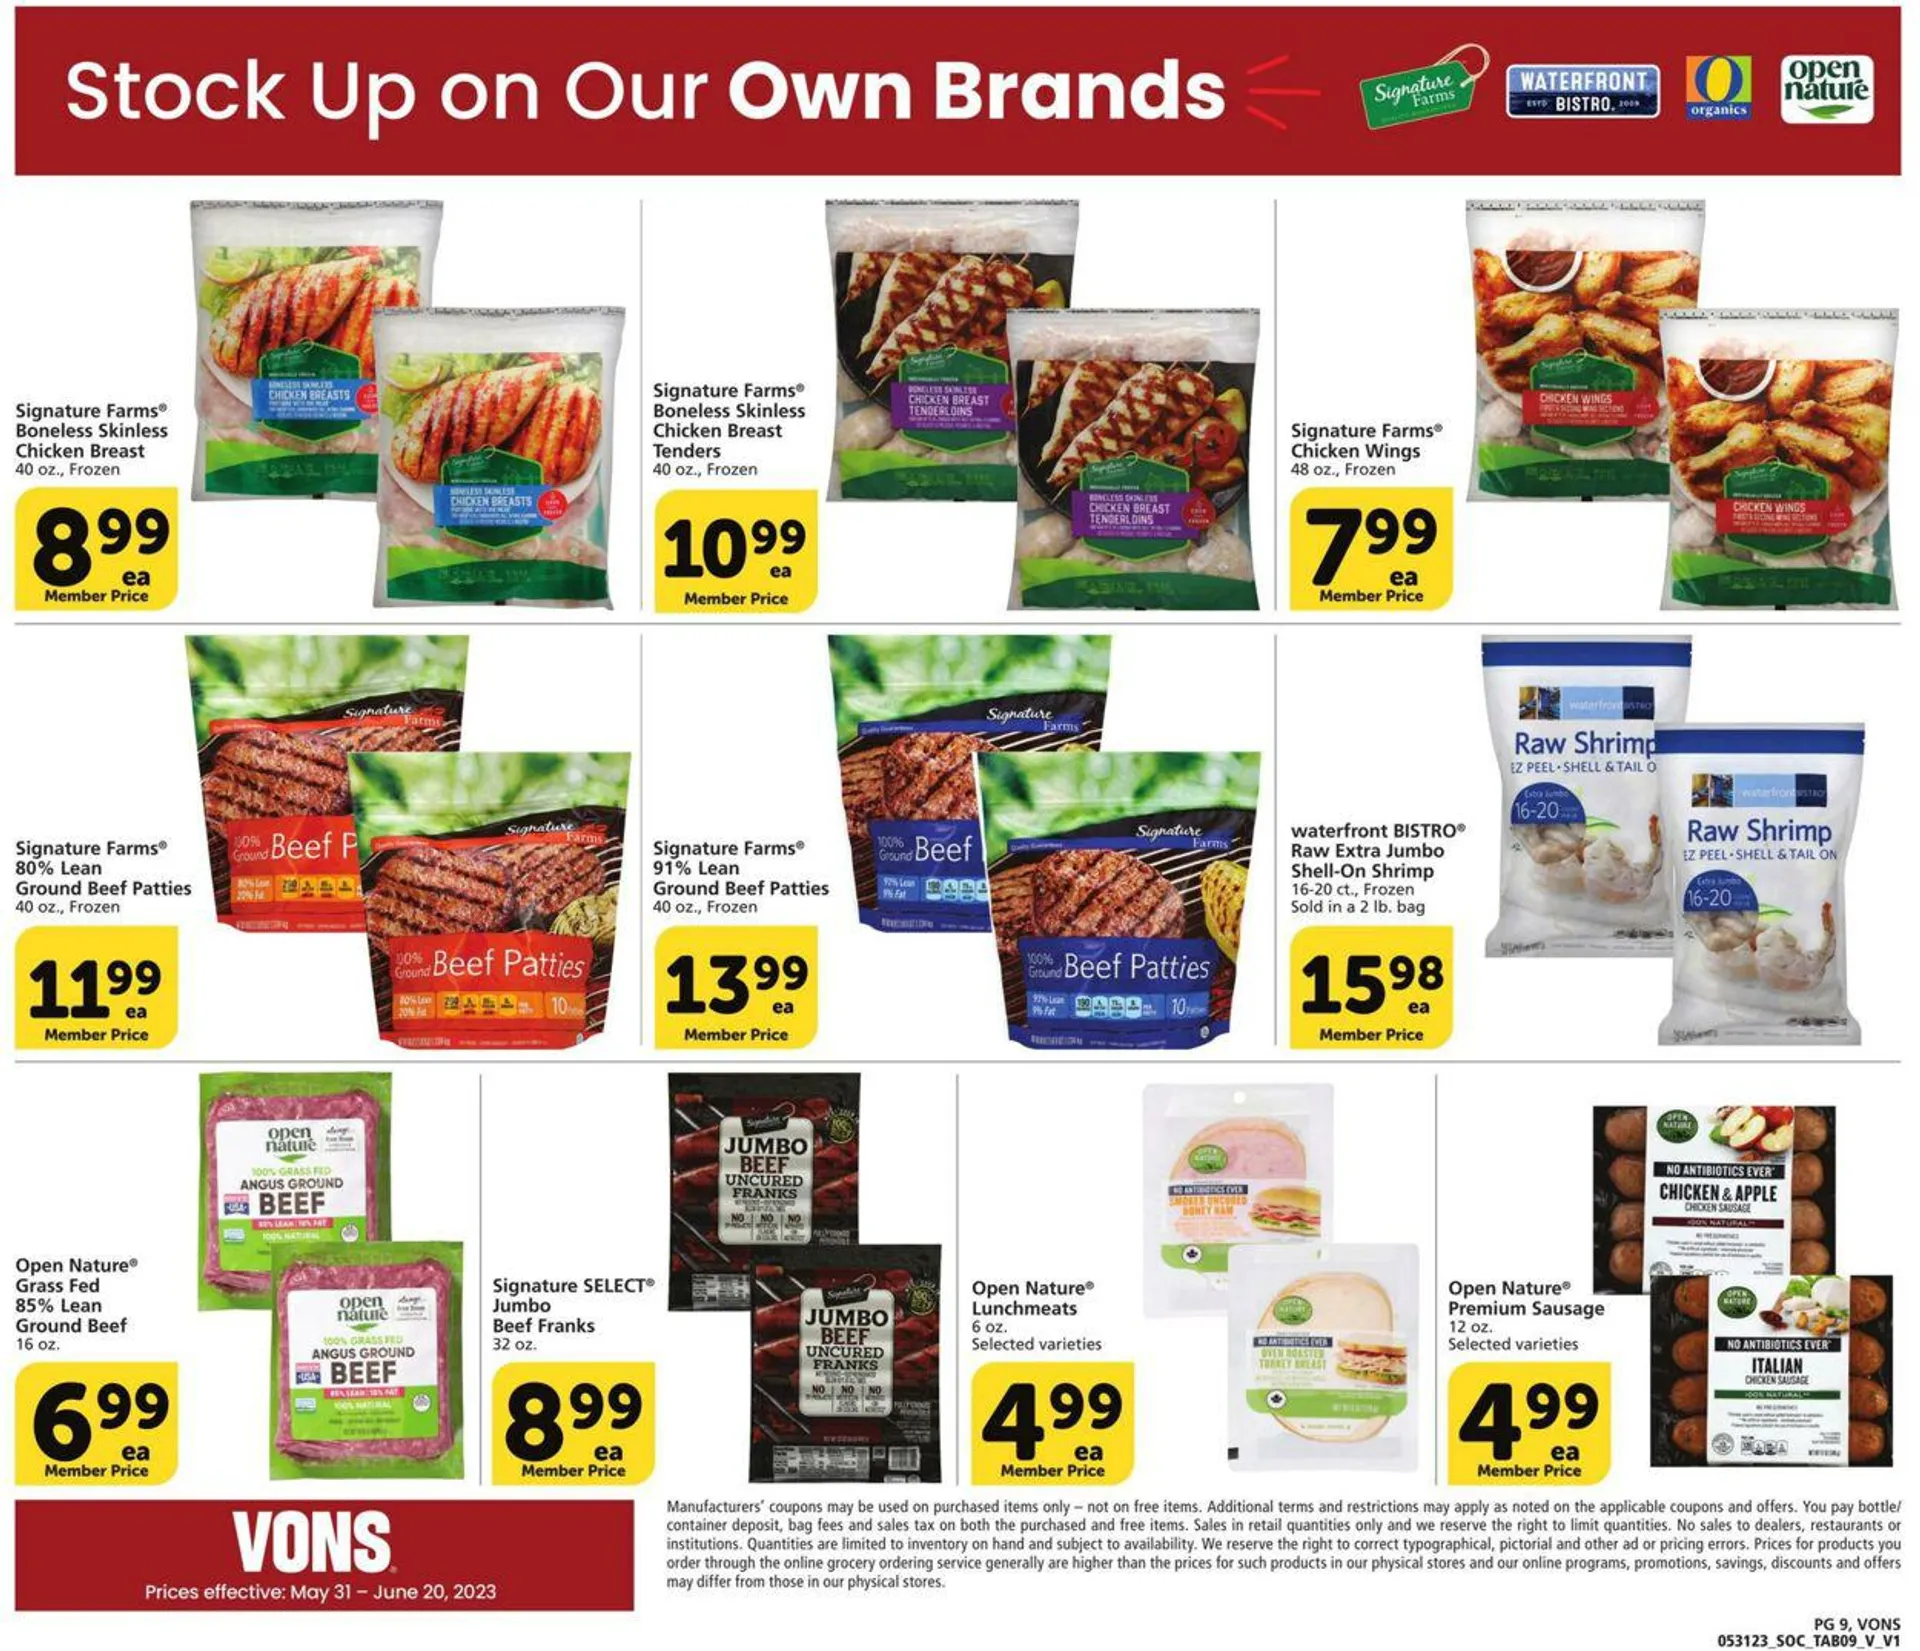 Vons Current weekly ad - 9